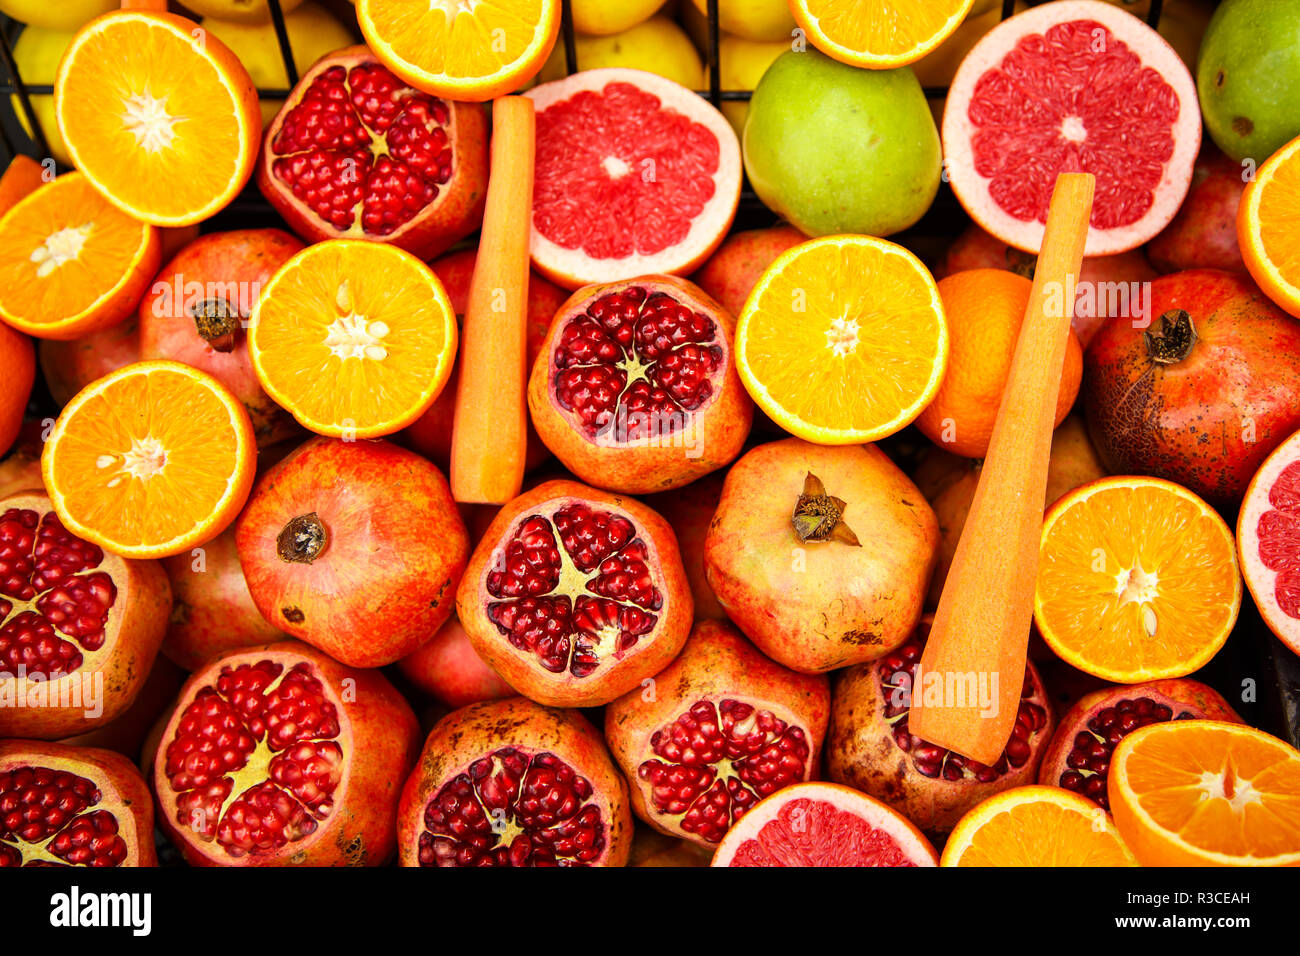 Ripe and juicy half fruit ready for making juice. Bright fruit background. Stock Photo